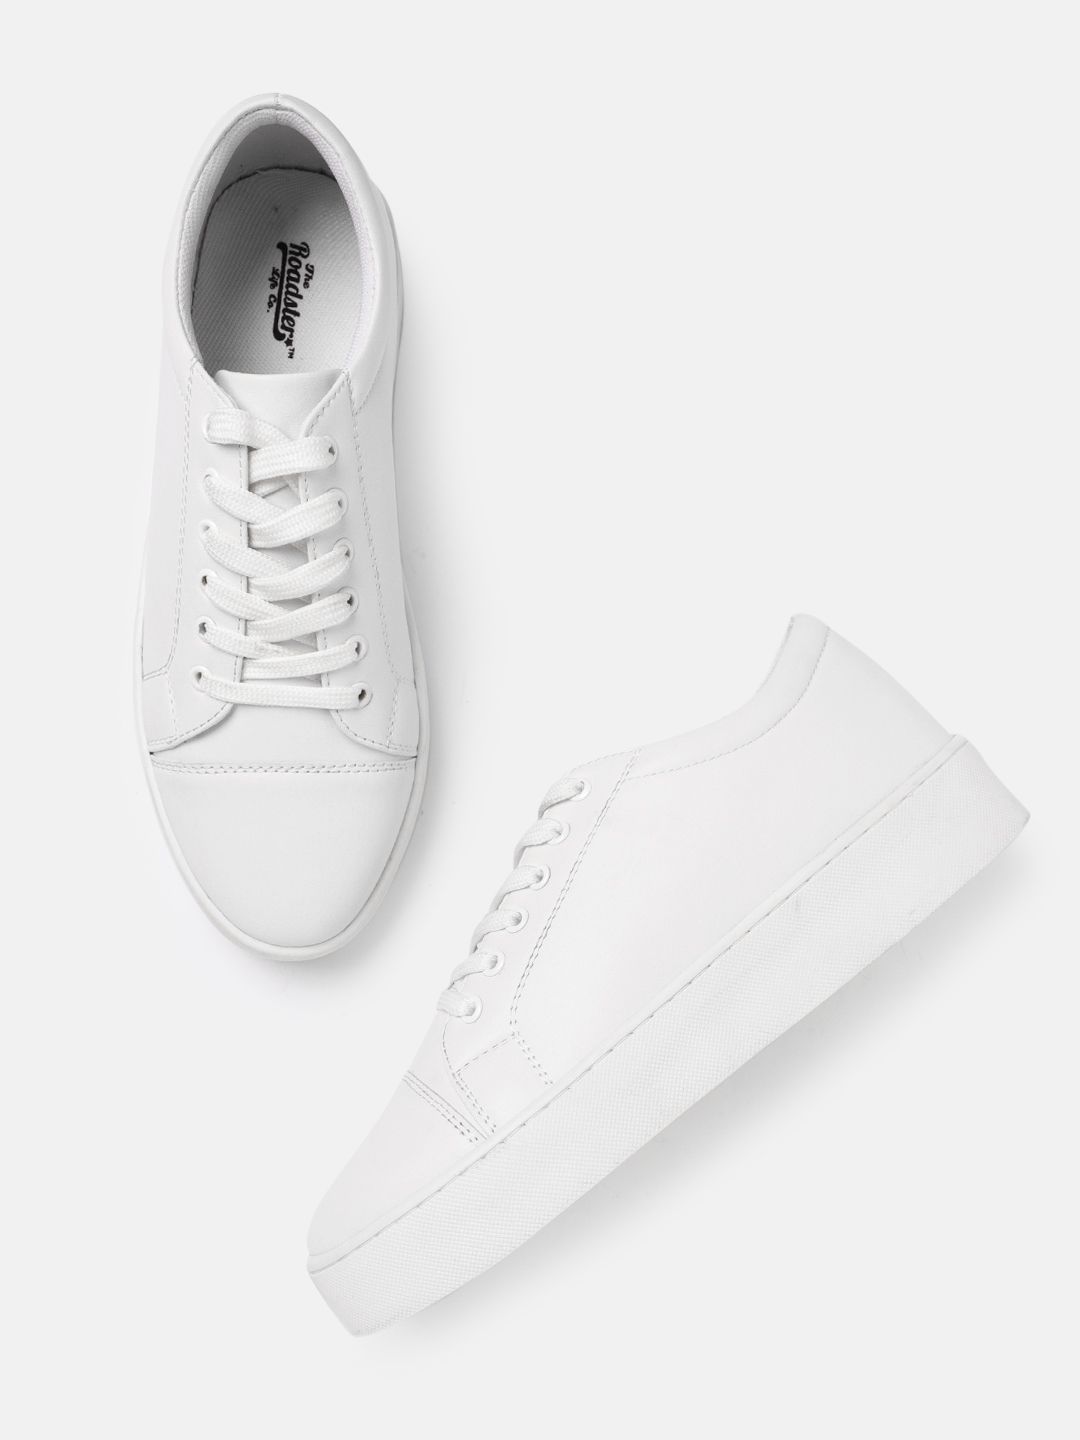 The Roadster Lifestyle Co Women White Solid Flatform Sneakers Price in India